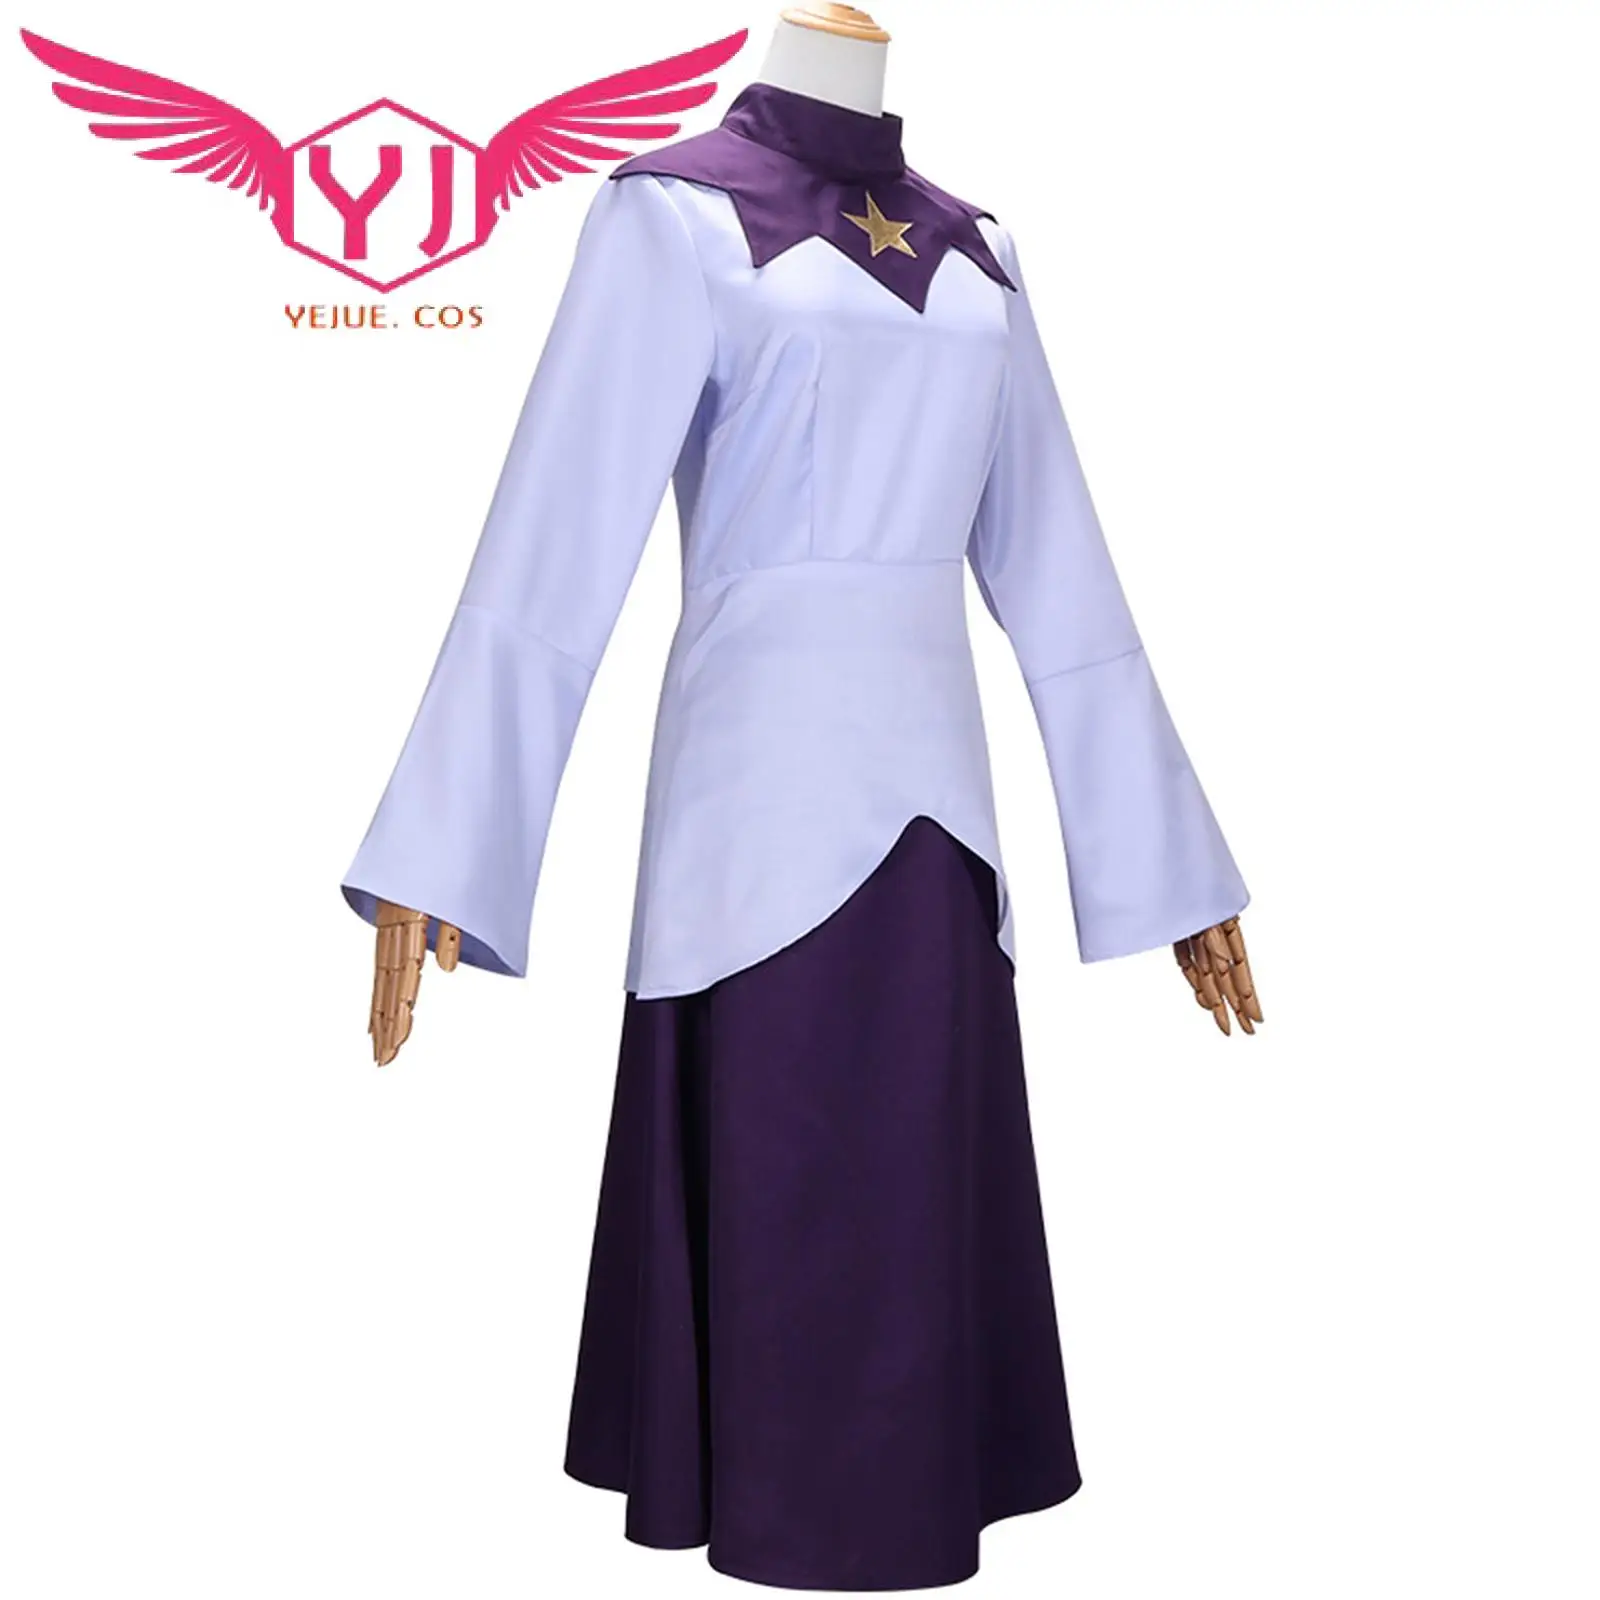 Anime The Good Witch Azura Costume Uniform Dress Outfit The Owl House Azura Cosplay Costume Dress for Women Adult